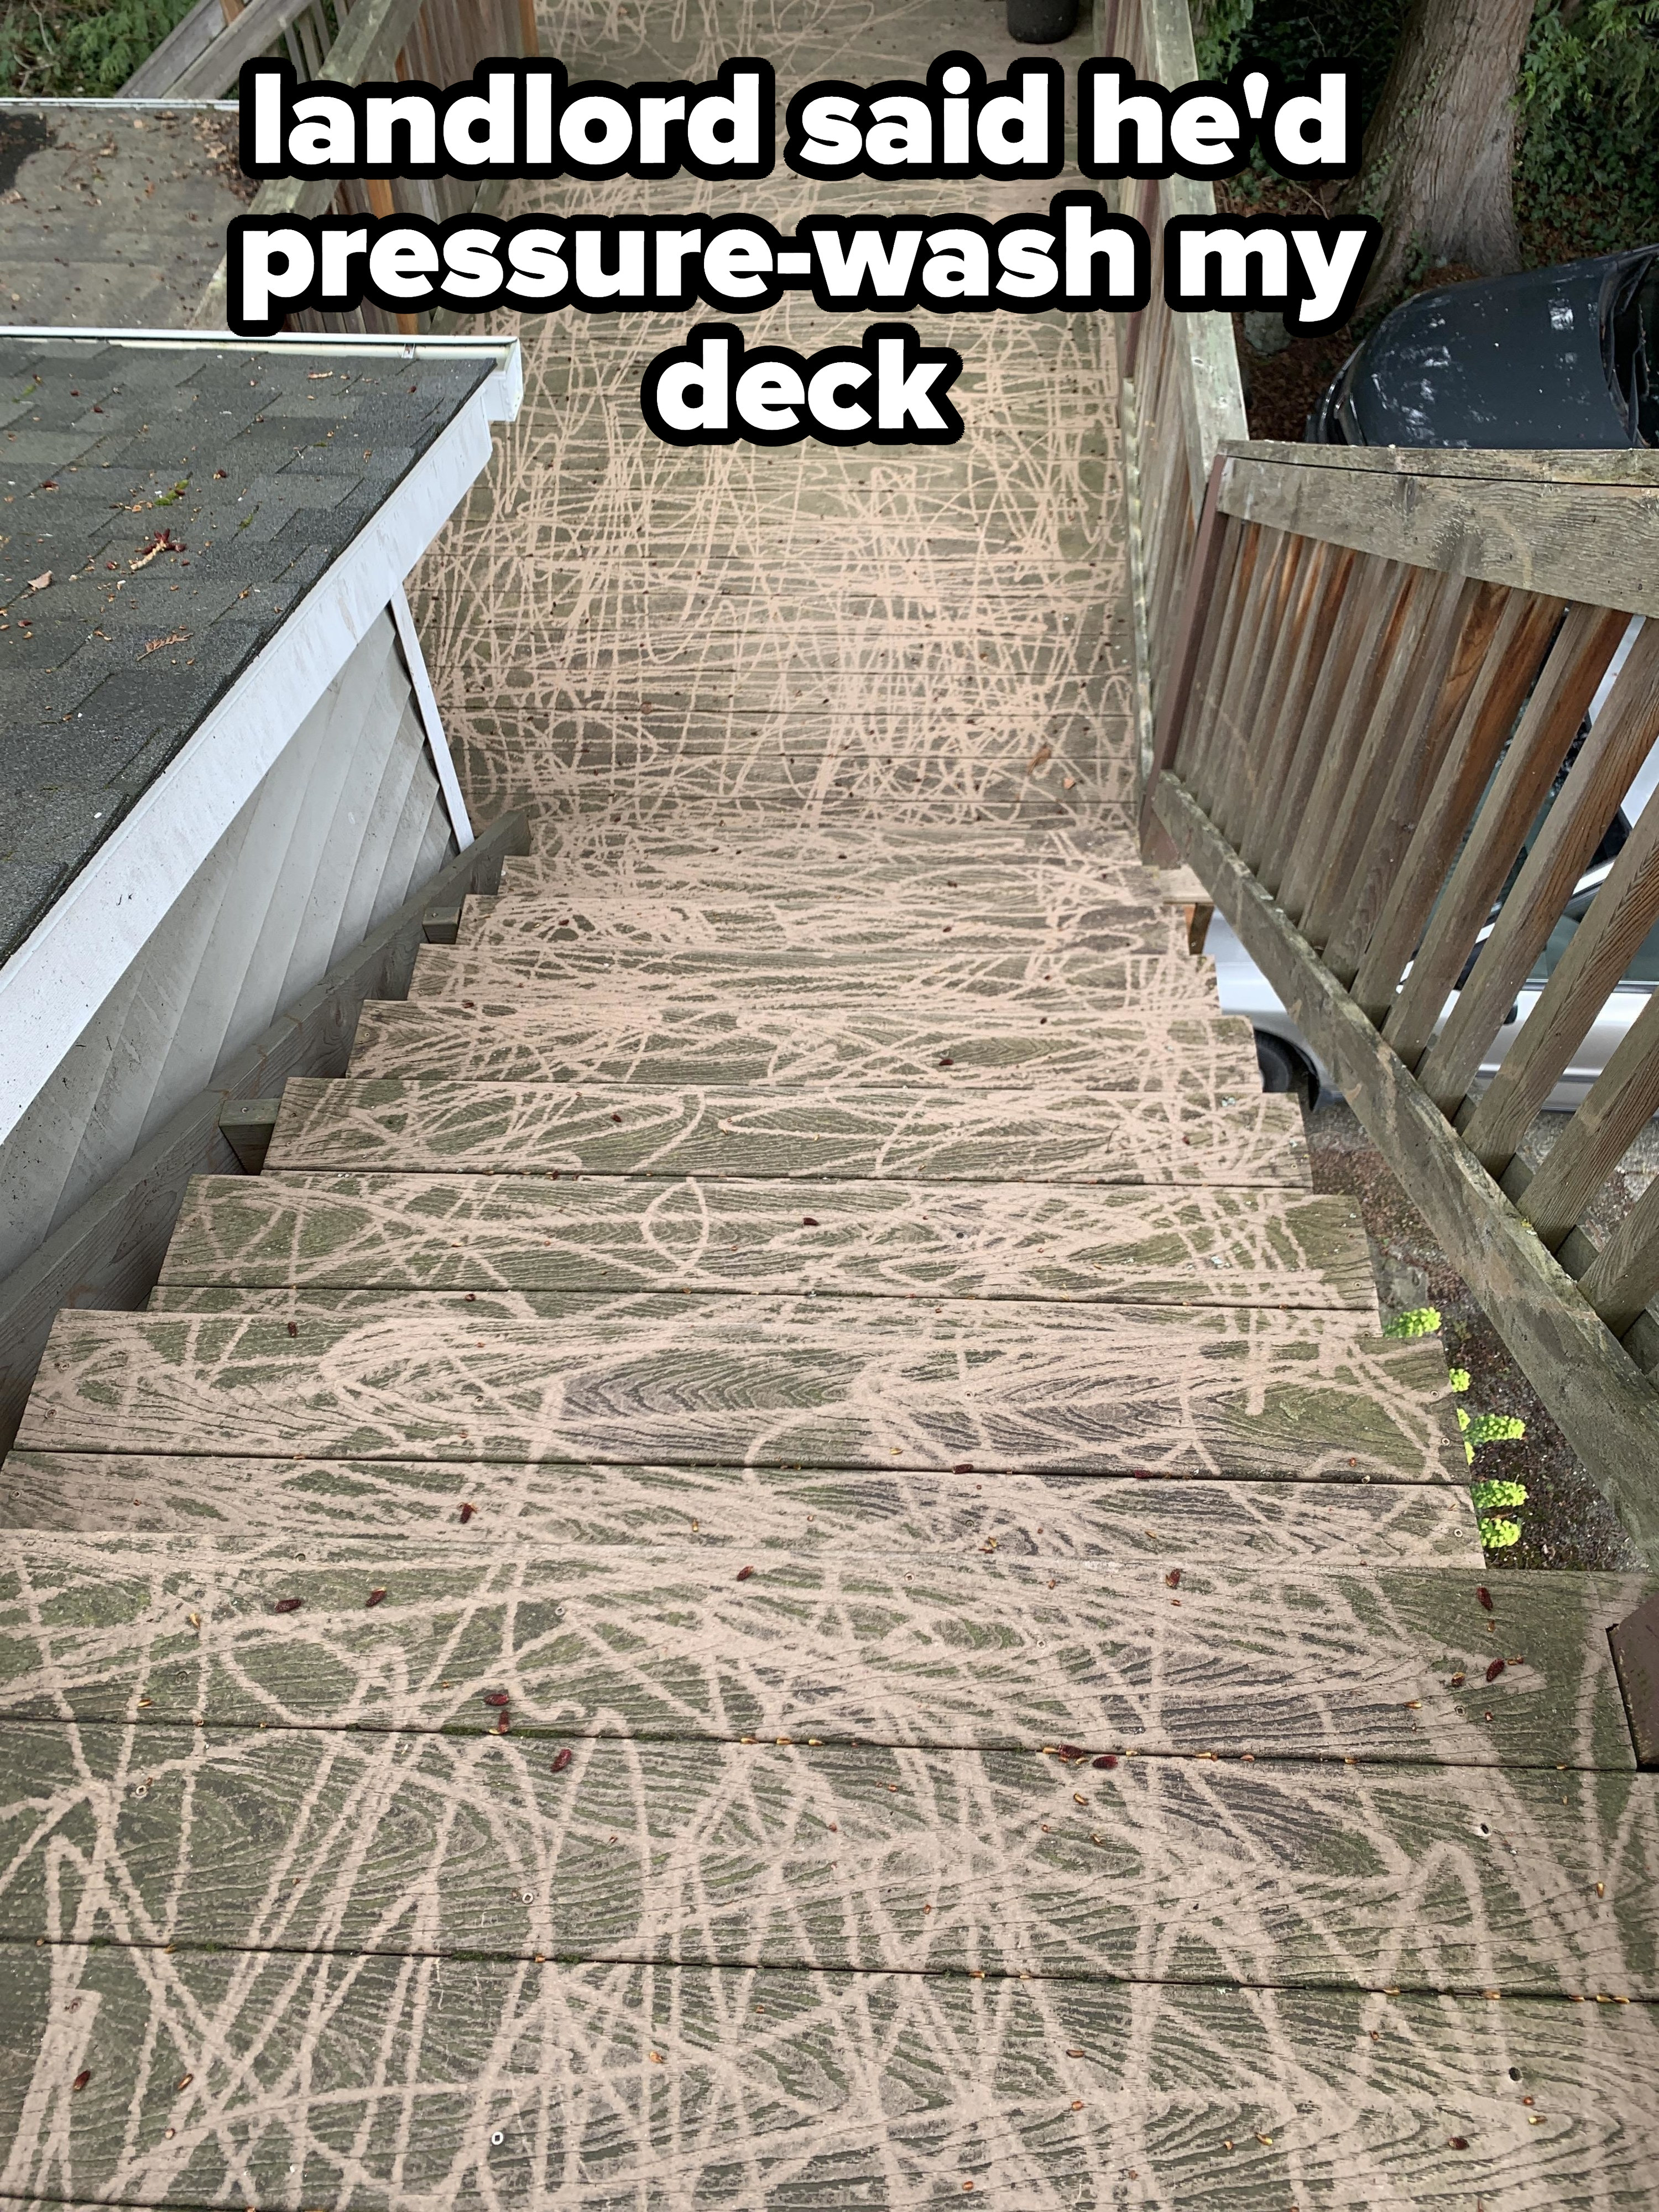 a landlord destroyed a deck by pressure-washing it, with streaks throughout the surface